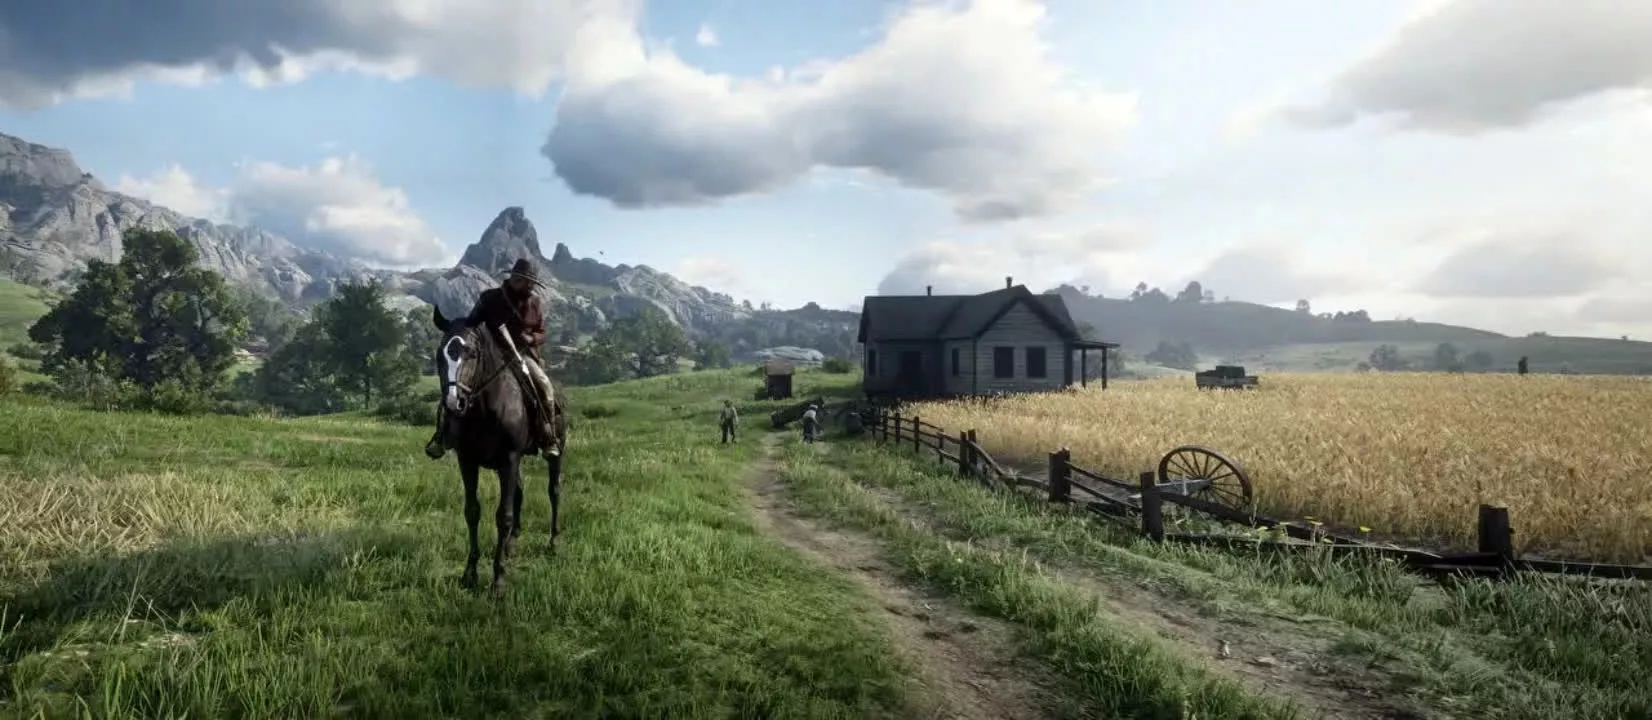 Red Dead Redemption 2 screenshot gets mistaken for the real outdoors in news segment